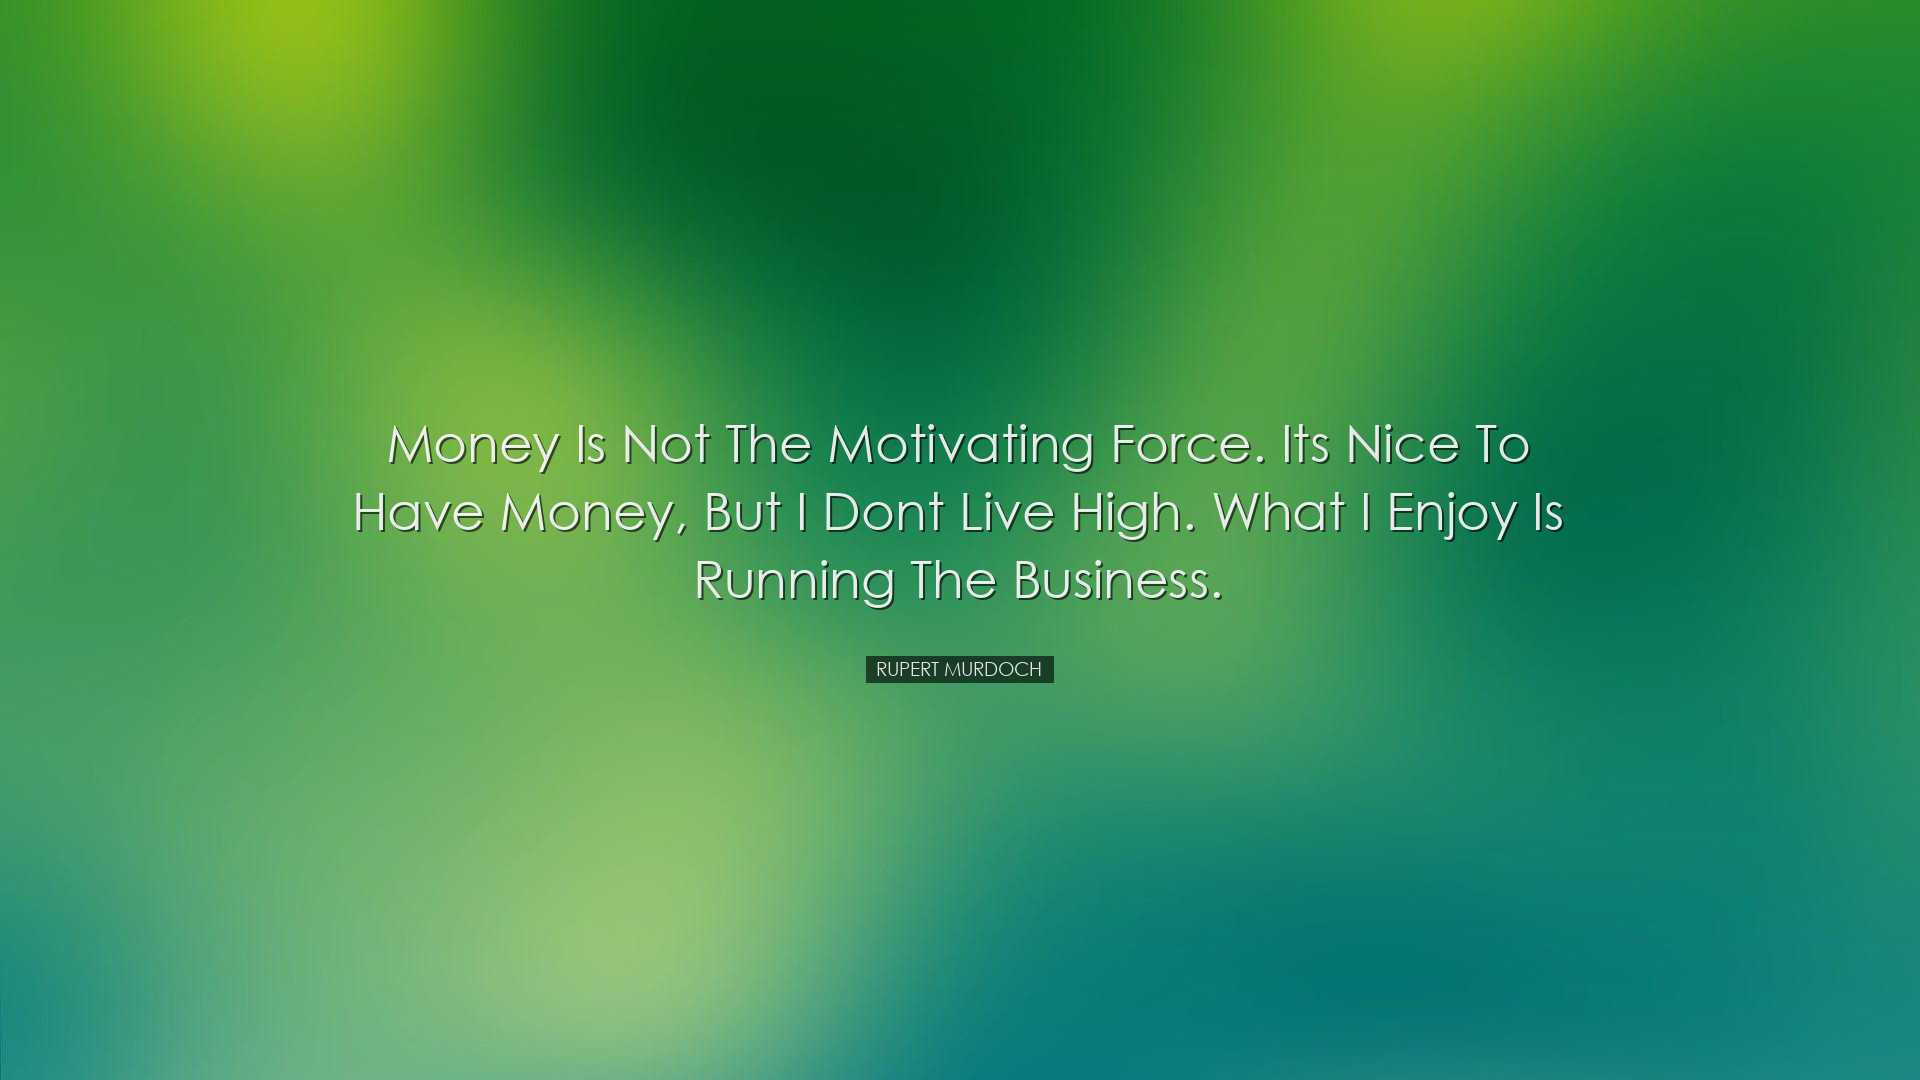 Money is not the motivating force. Its nice to have money, but I d